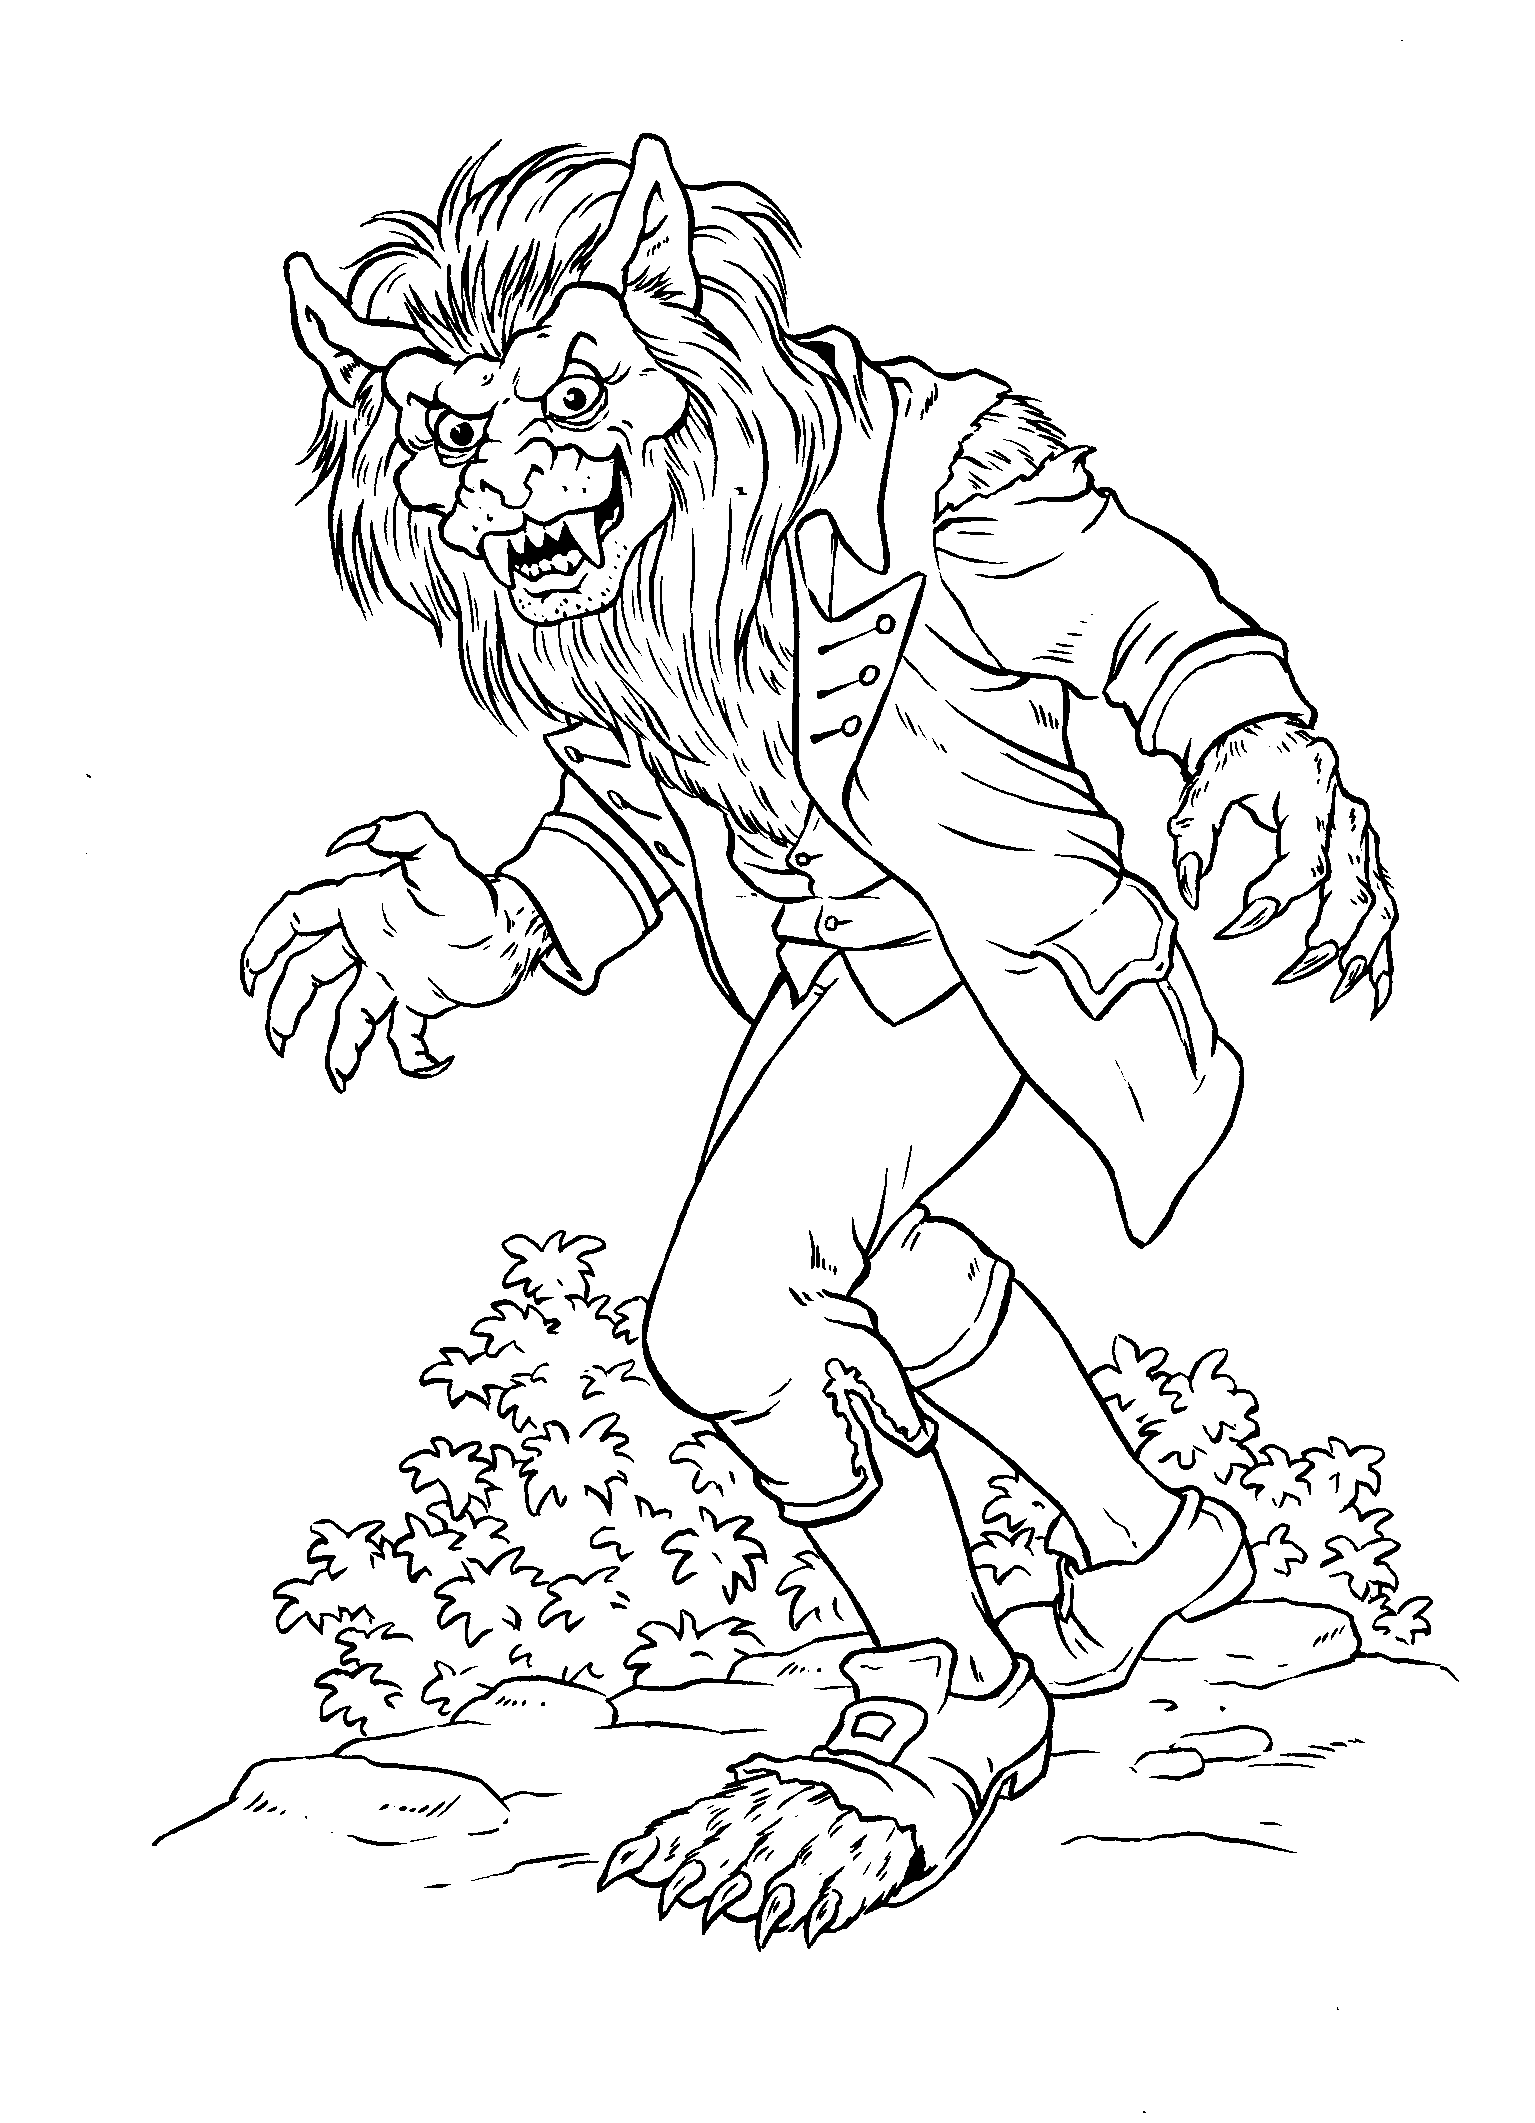 Coloring page - Werewolf